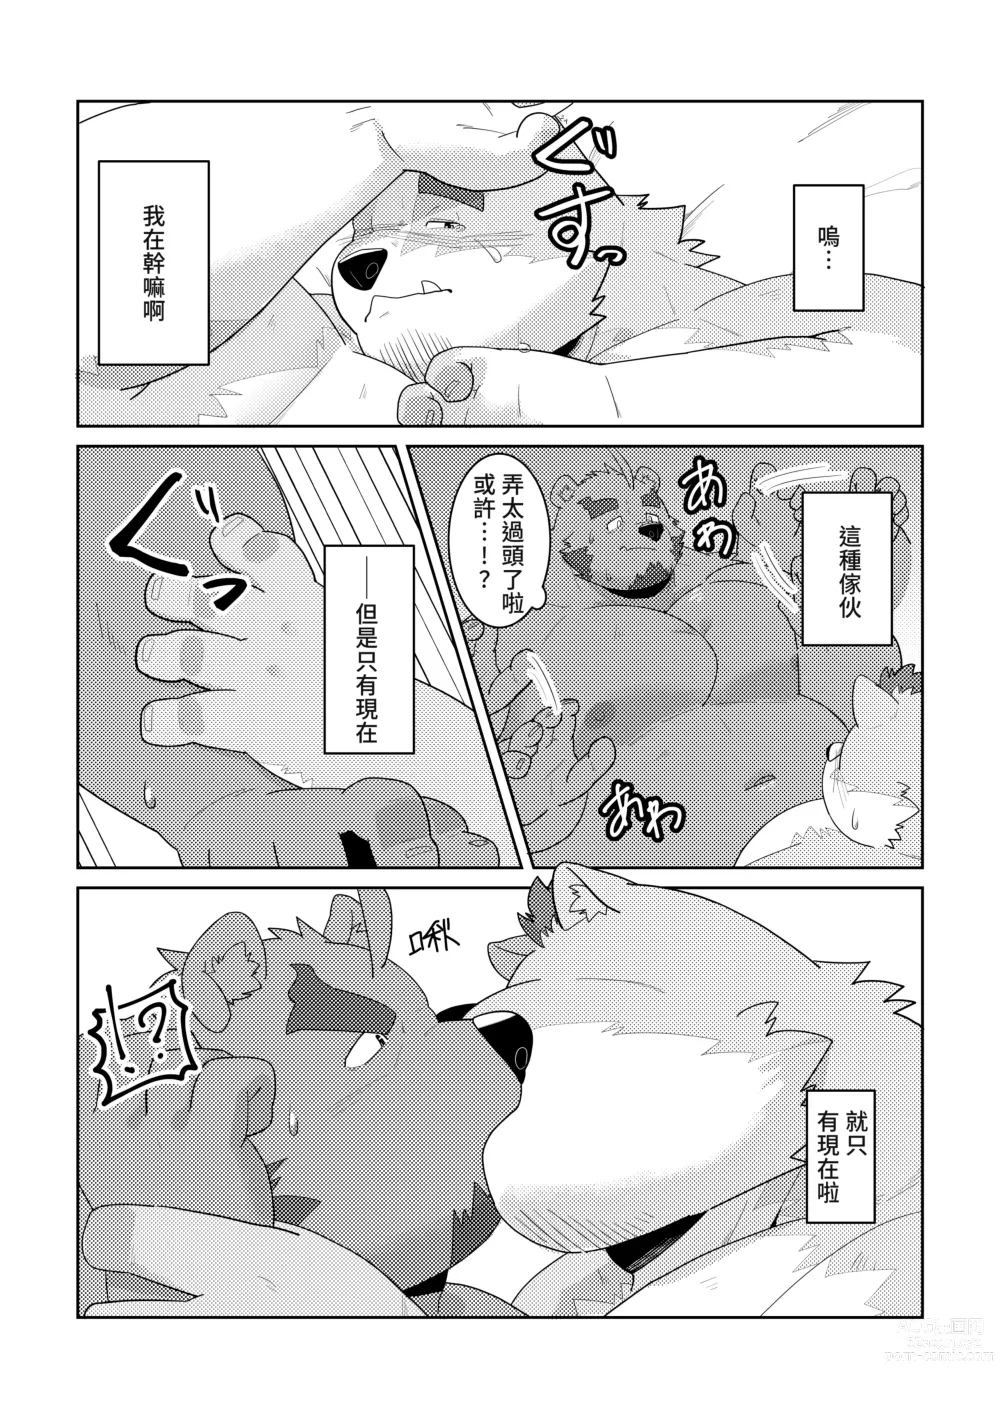 Page 18 of doujinshi 幽靈戀人